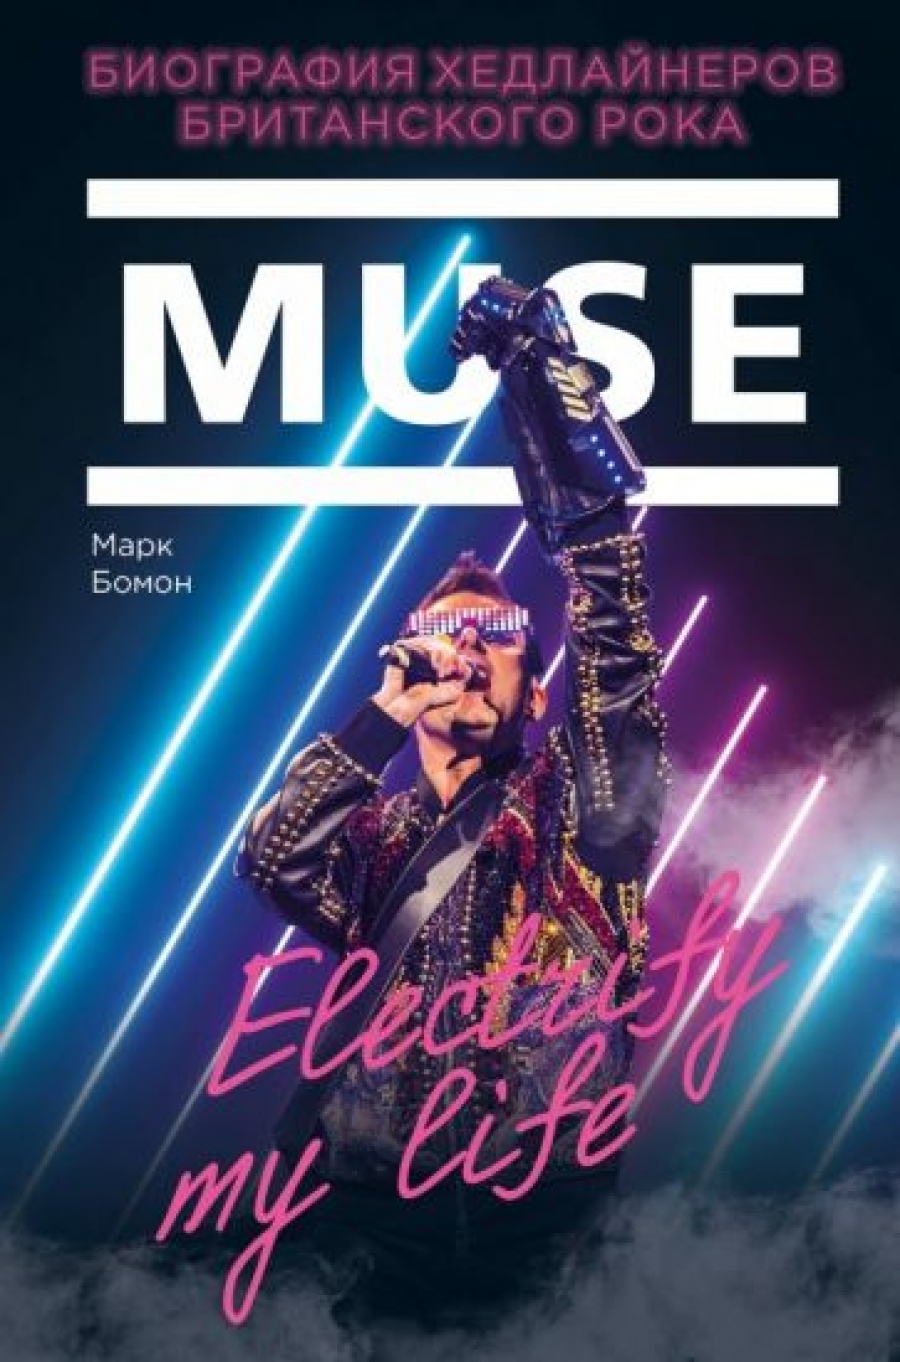  . Muse. Electrify my life.     